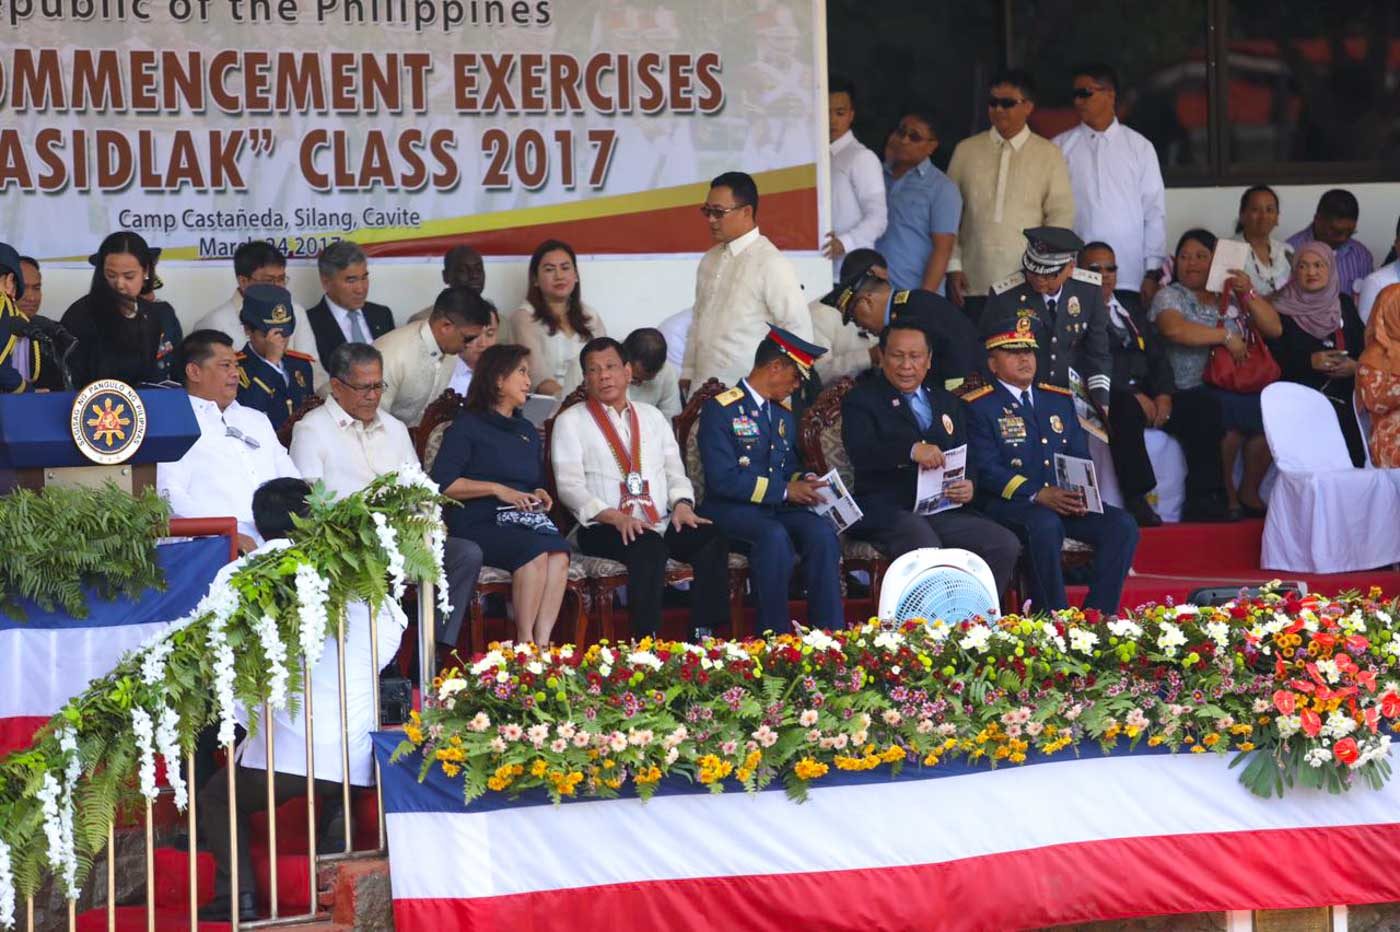 WHAT DID THEY TALK ABOUT? Vice President Leni Robredo and President Rodrigo Duterte chat at the Commencement Exercises of Philippine National Police Academy Class 2017. Photo from Office of the Vice President  